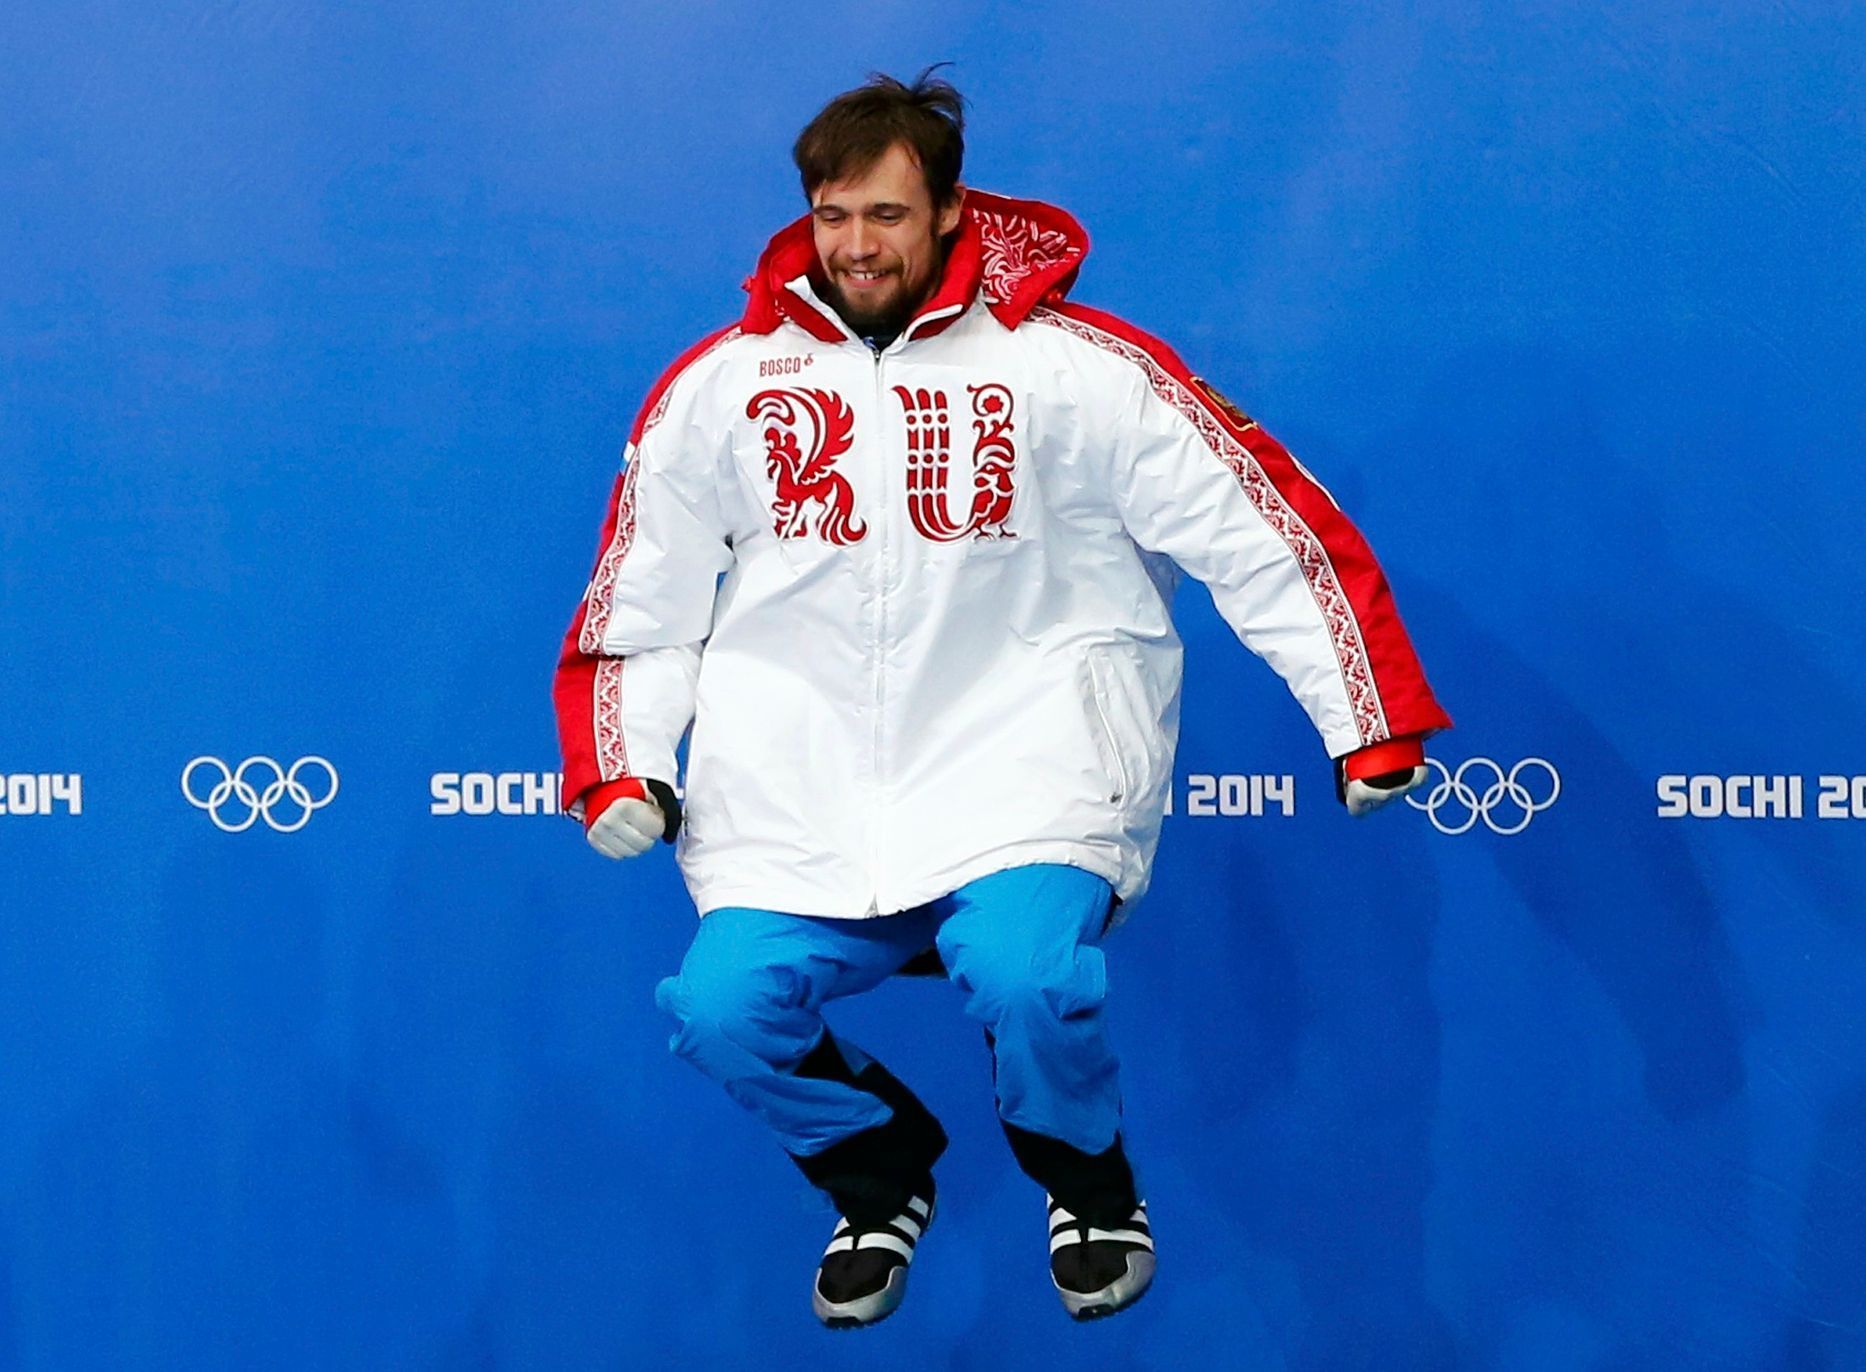 Russia's Alexander Tretiakov jumps on the podium at the flower ceremony after winning the men's skeleton event at the 2014 Sochi Winter Olympics